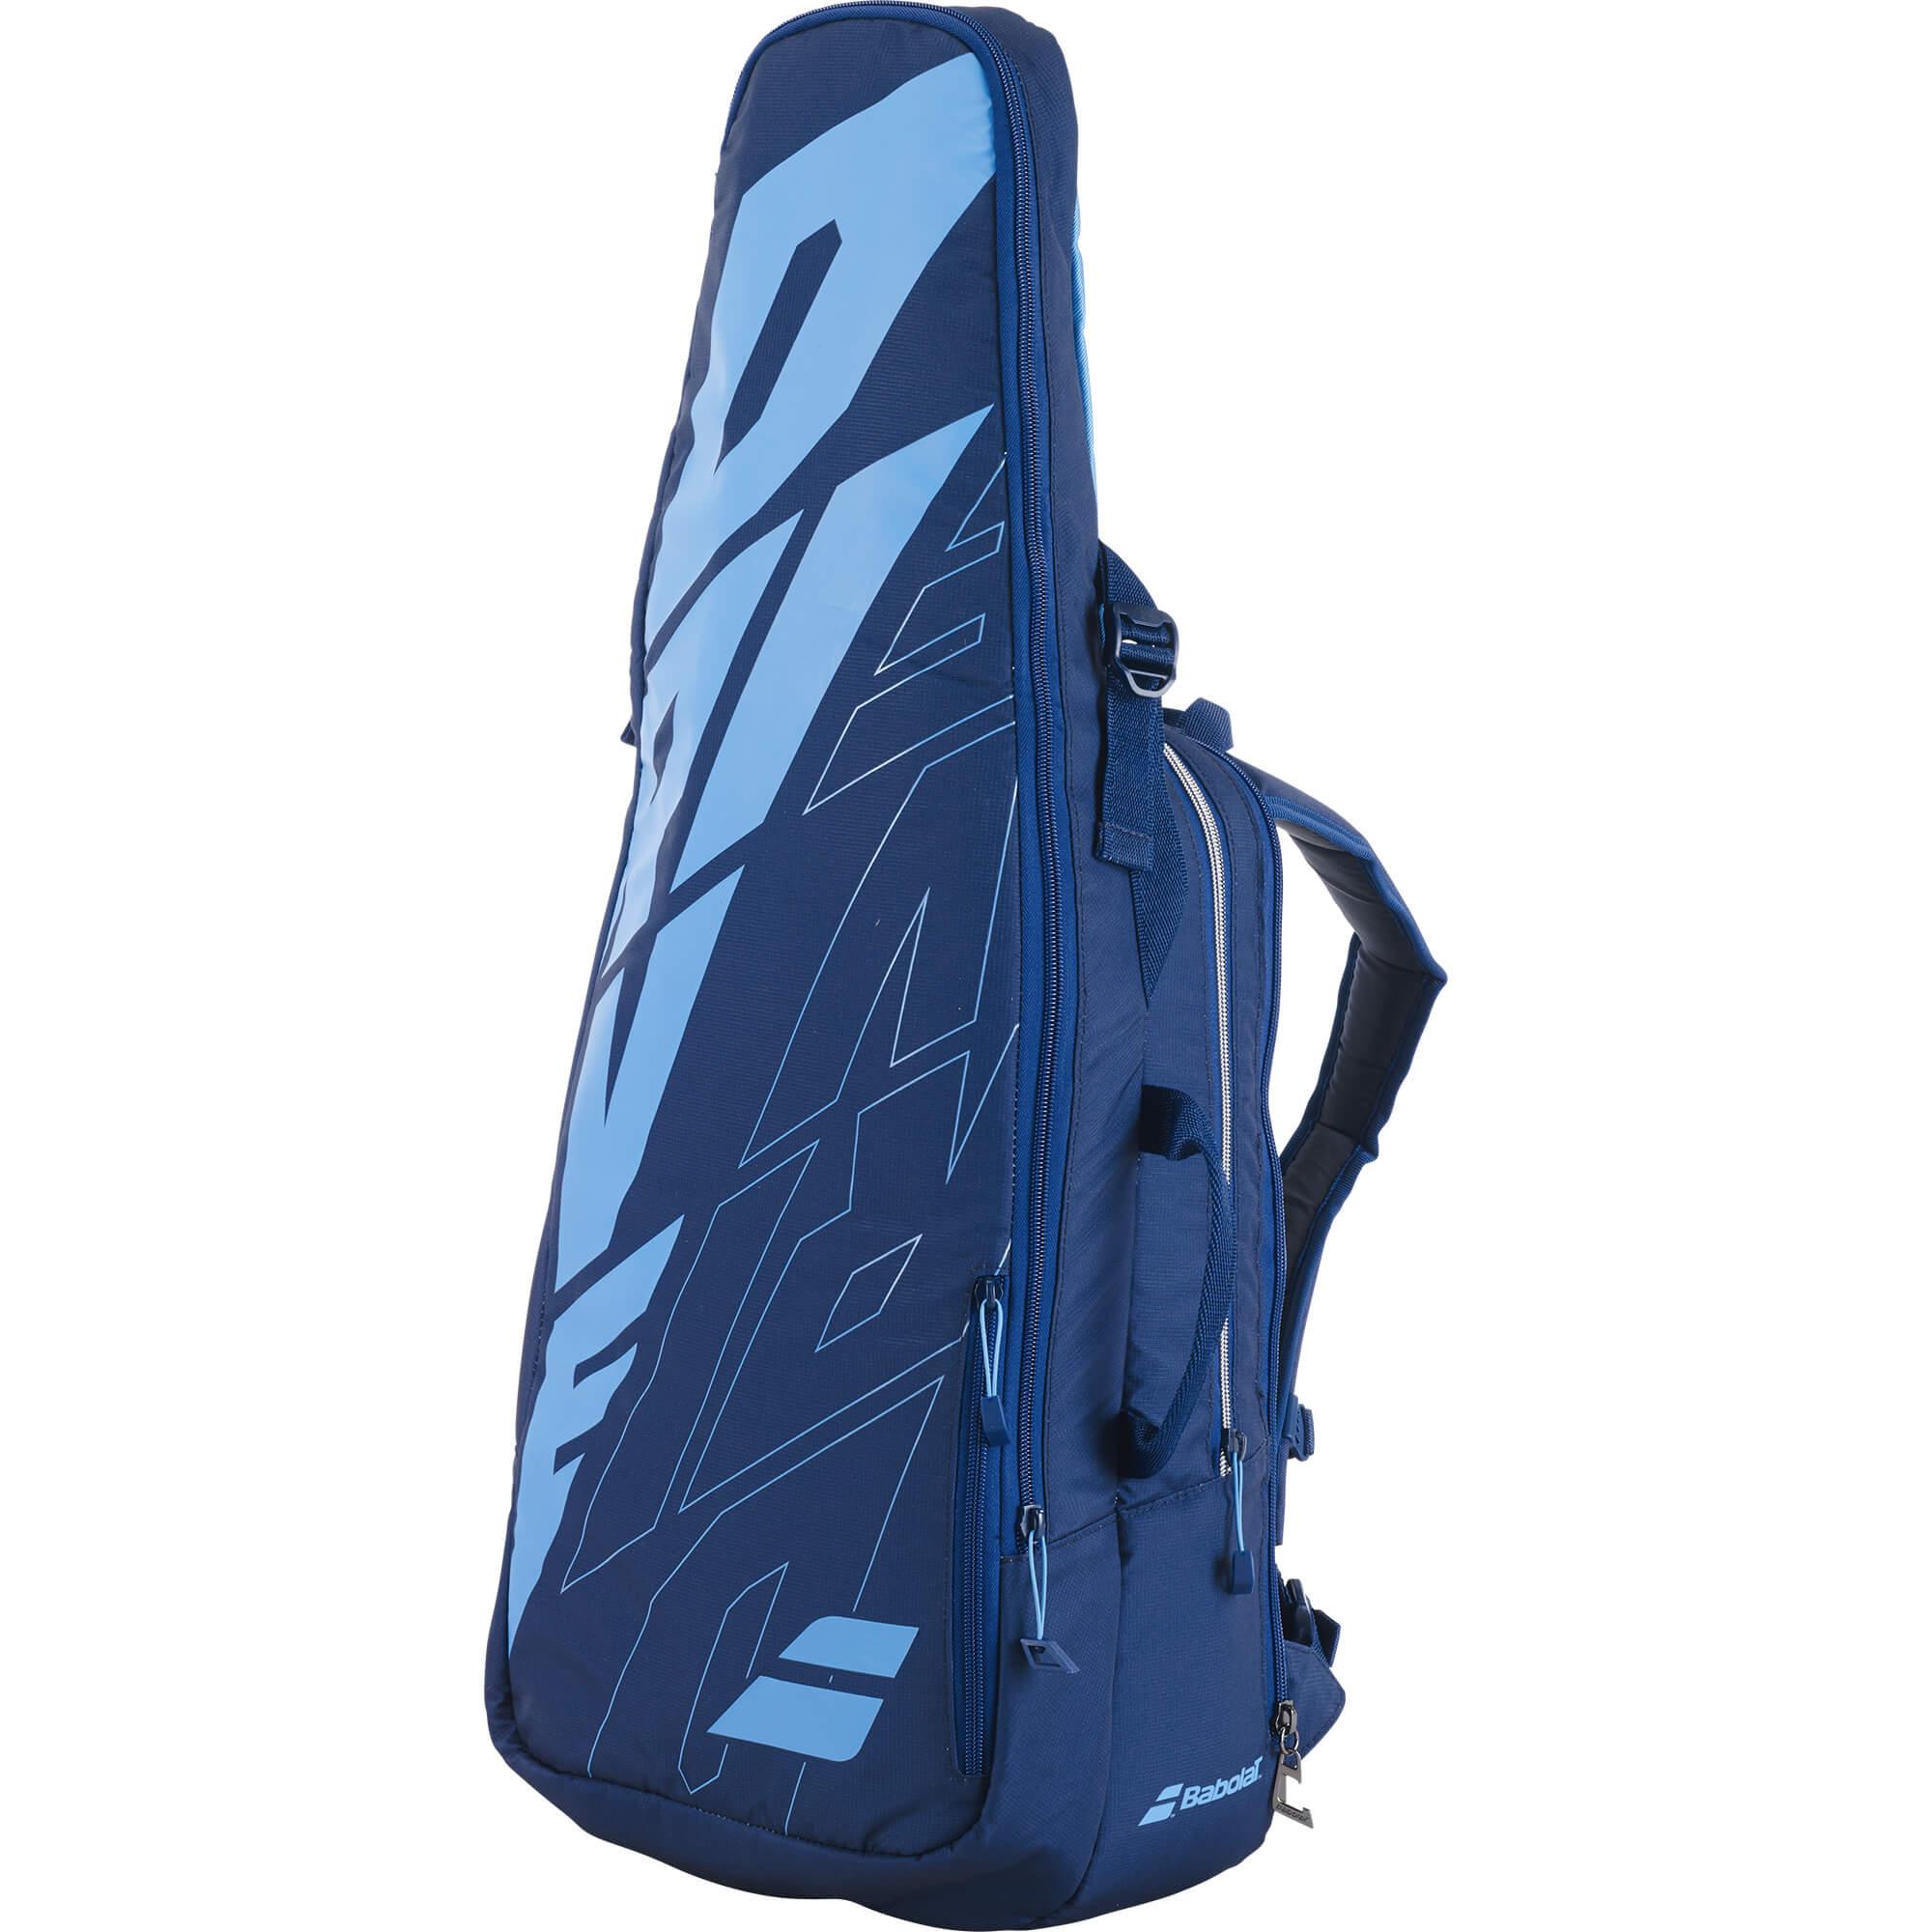 Babolat Pure Drive 2021 Backpack-All Things Tennis-UK tennis shop